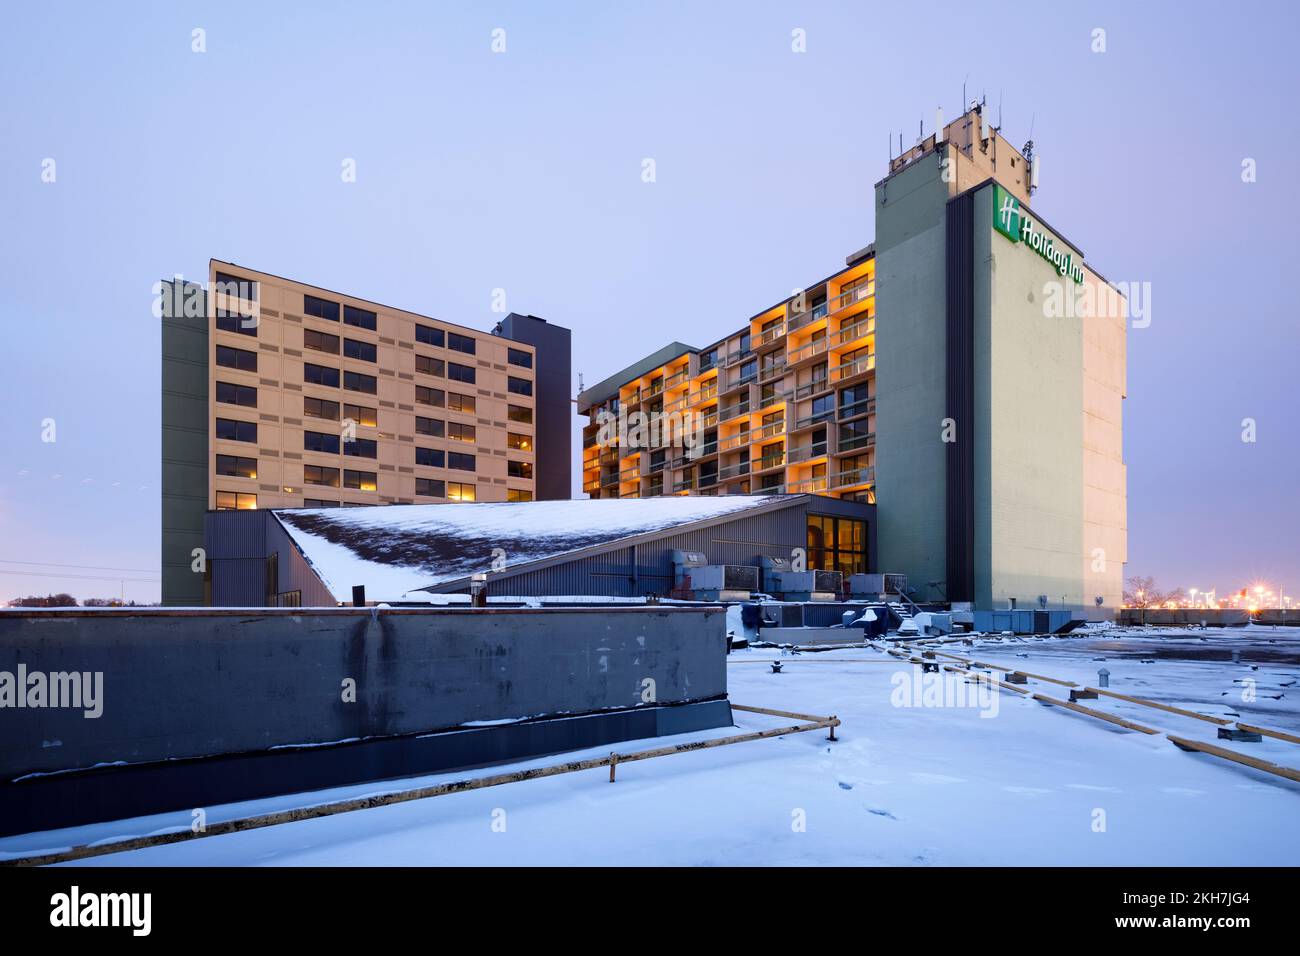 An exterior view of the now demolished Holiday Inn Yorkdale Hotel in Toronto, Ontario, Canada. Stock Photo